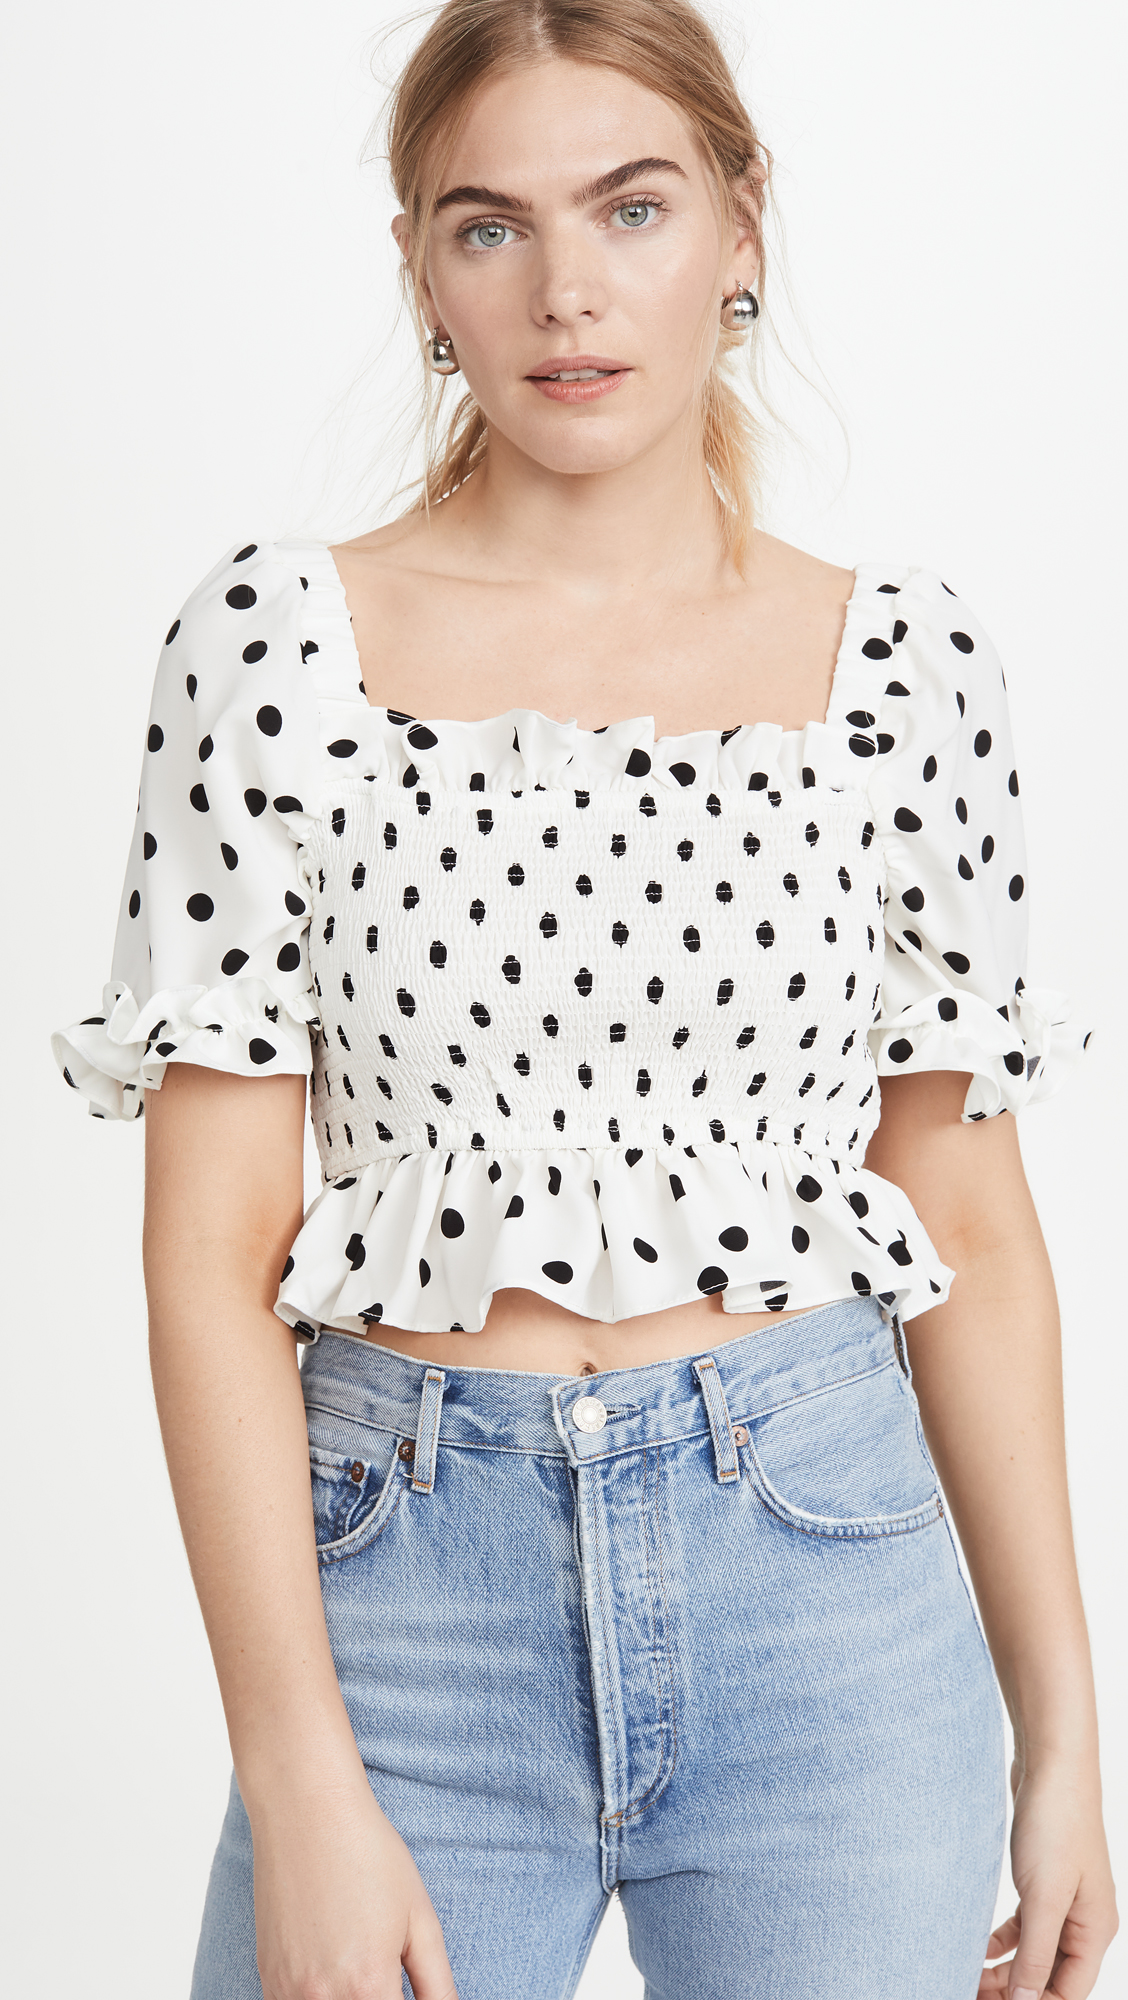 28 Pretty Summer Tops We'll Be Wearing This Season | Who What Wear